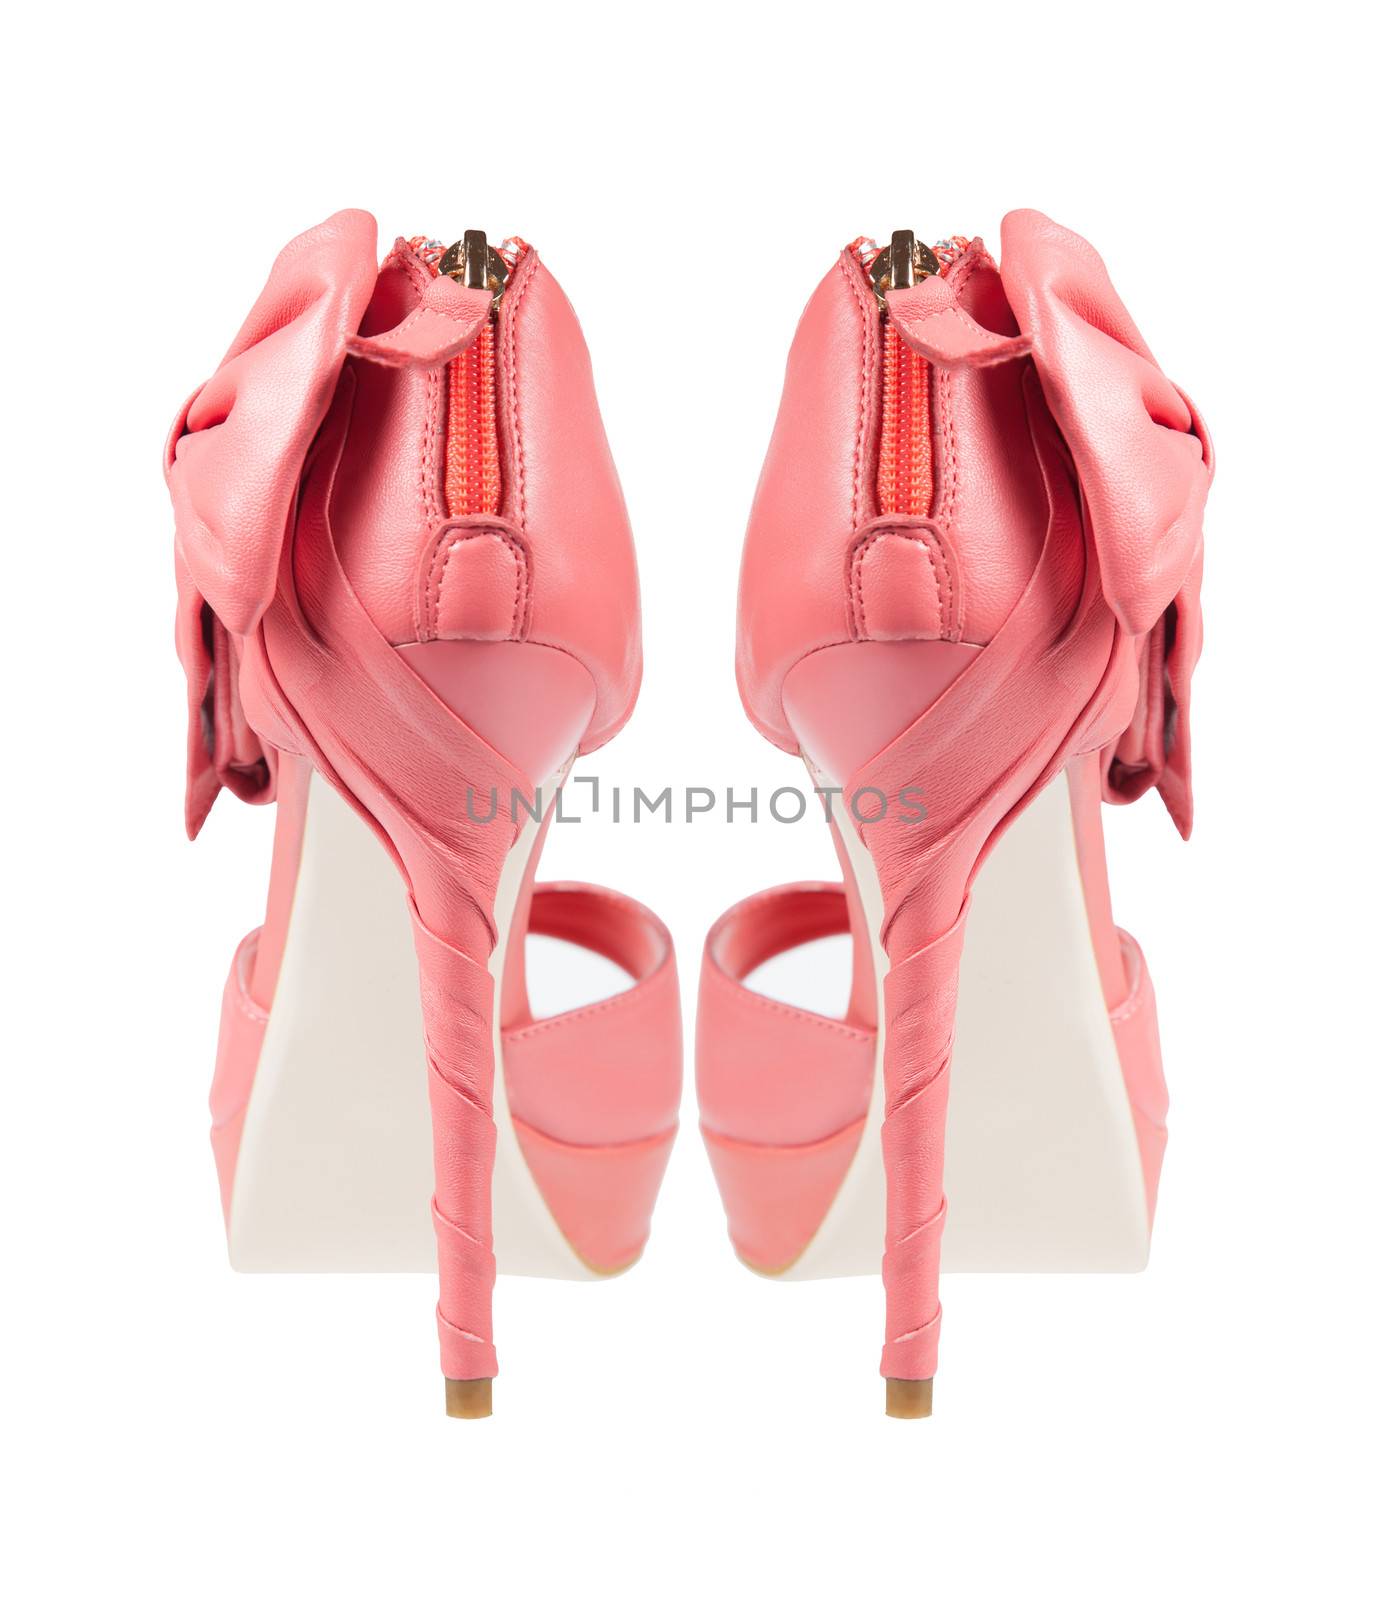 Evening pink shoes with a bow on a high heel Isolated on a white background. collage, rear view